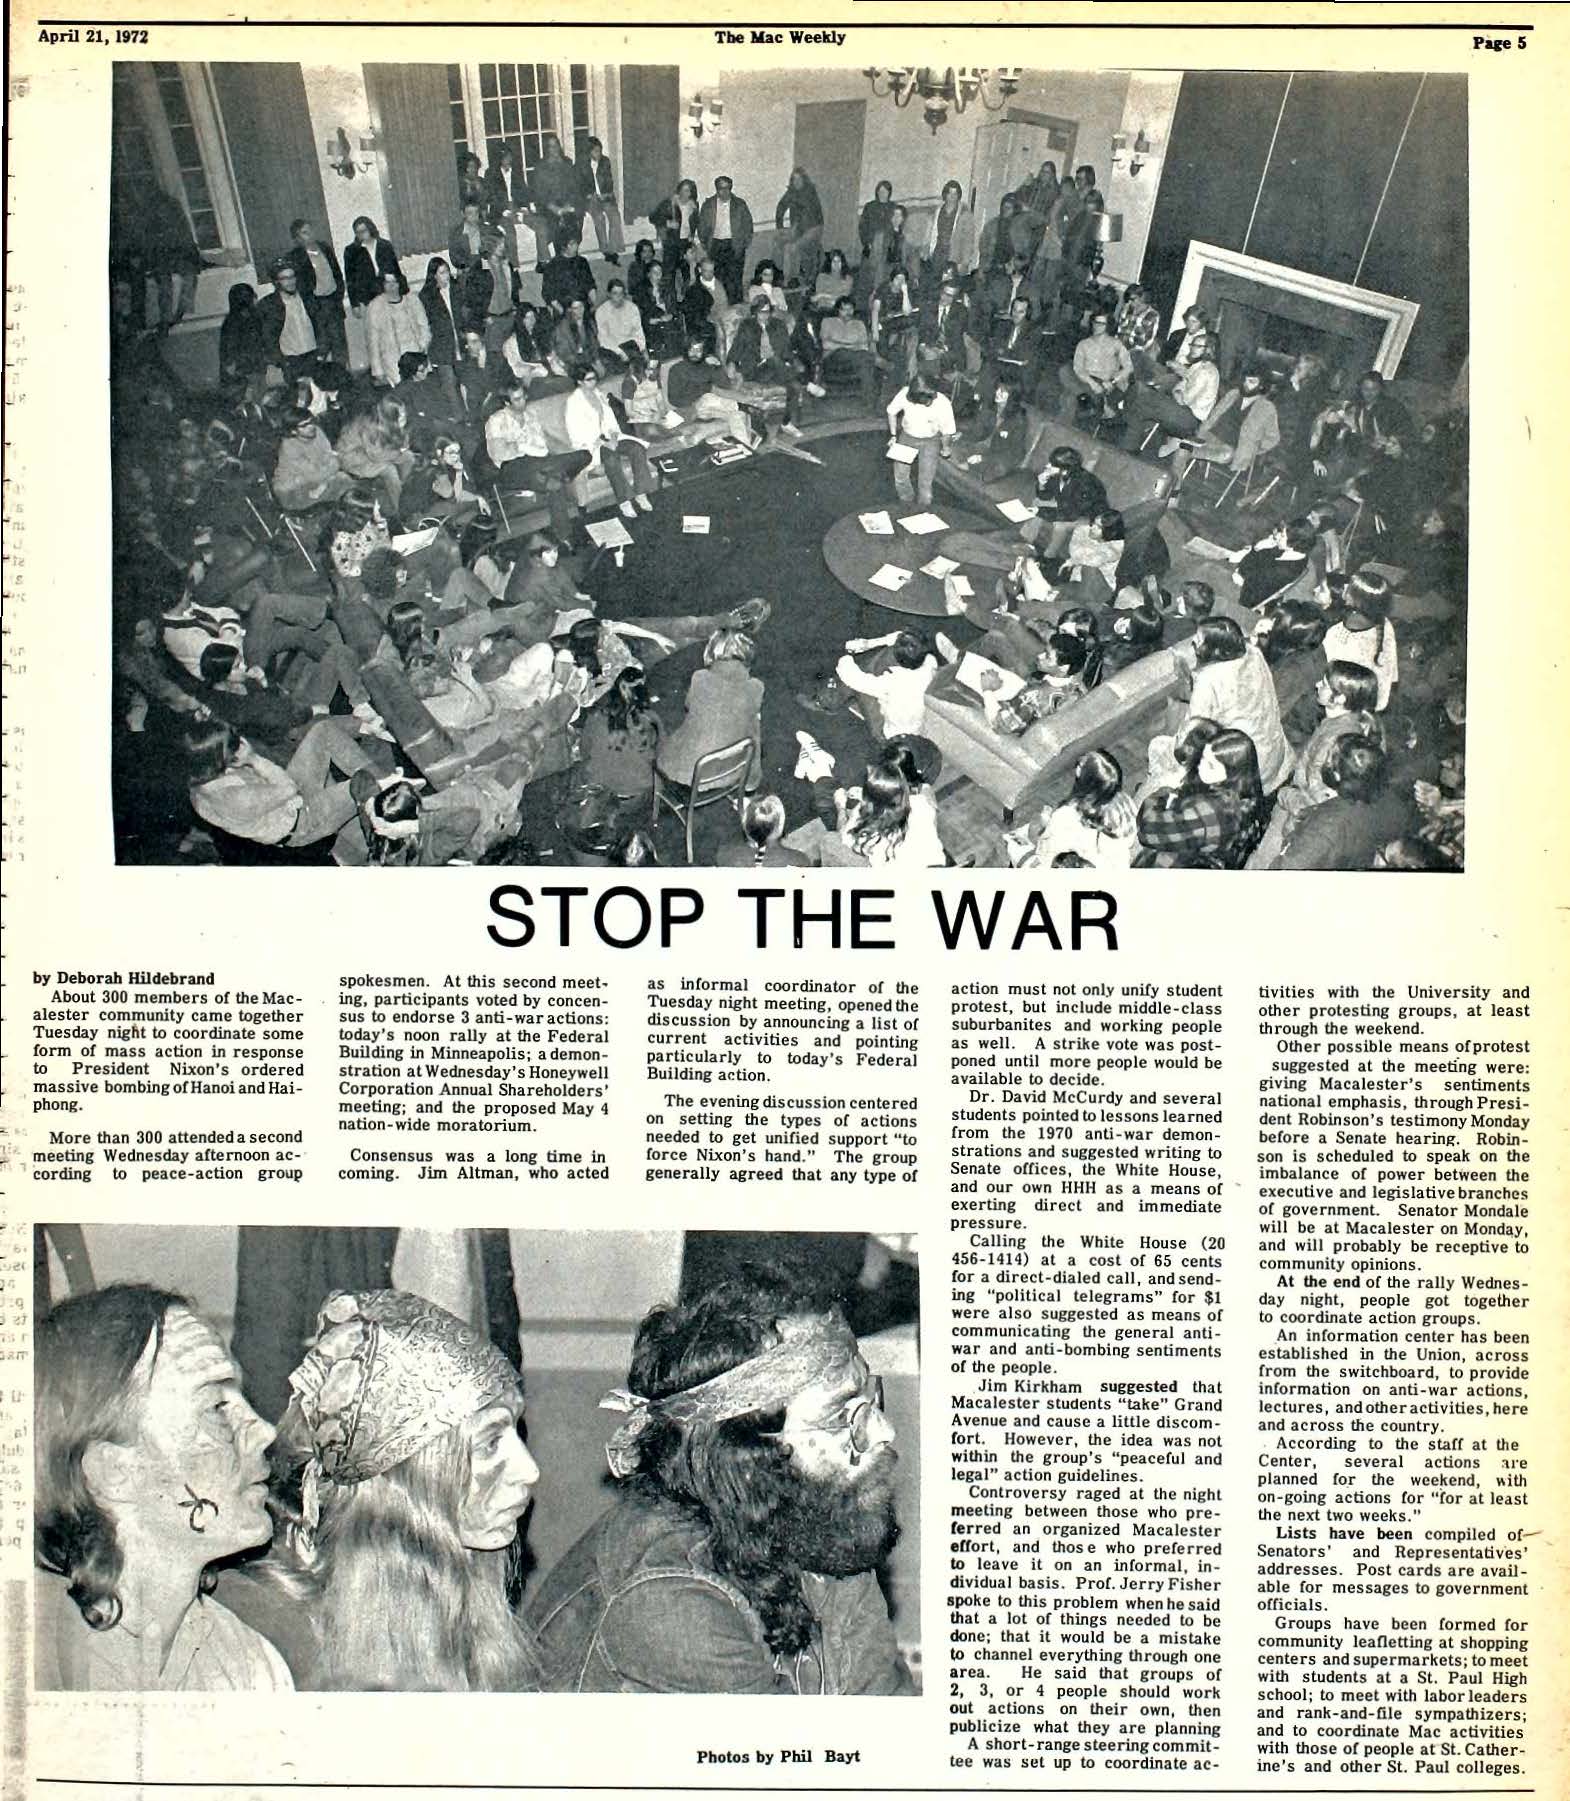 The Mac Weekly, April 21, 1972. Stop the War.